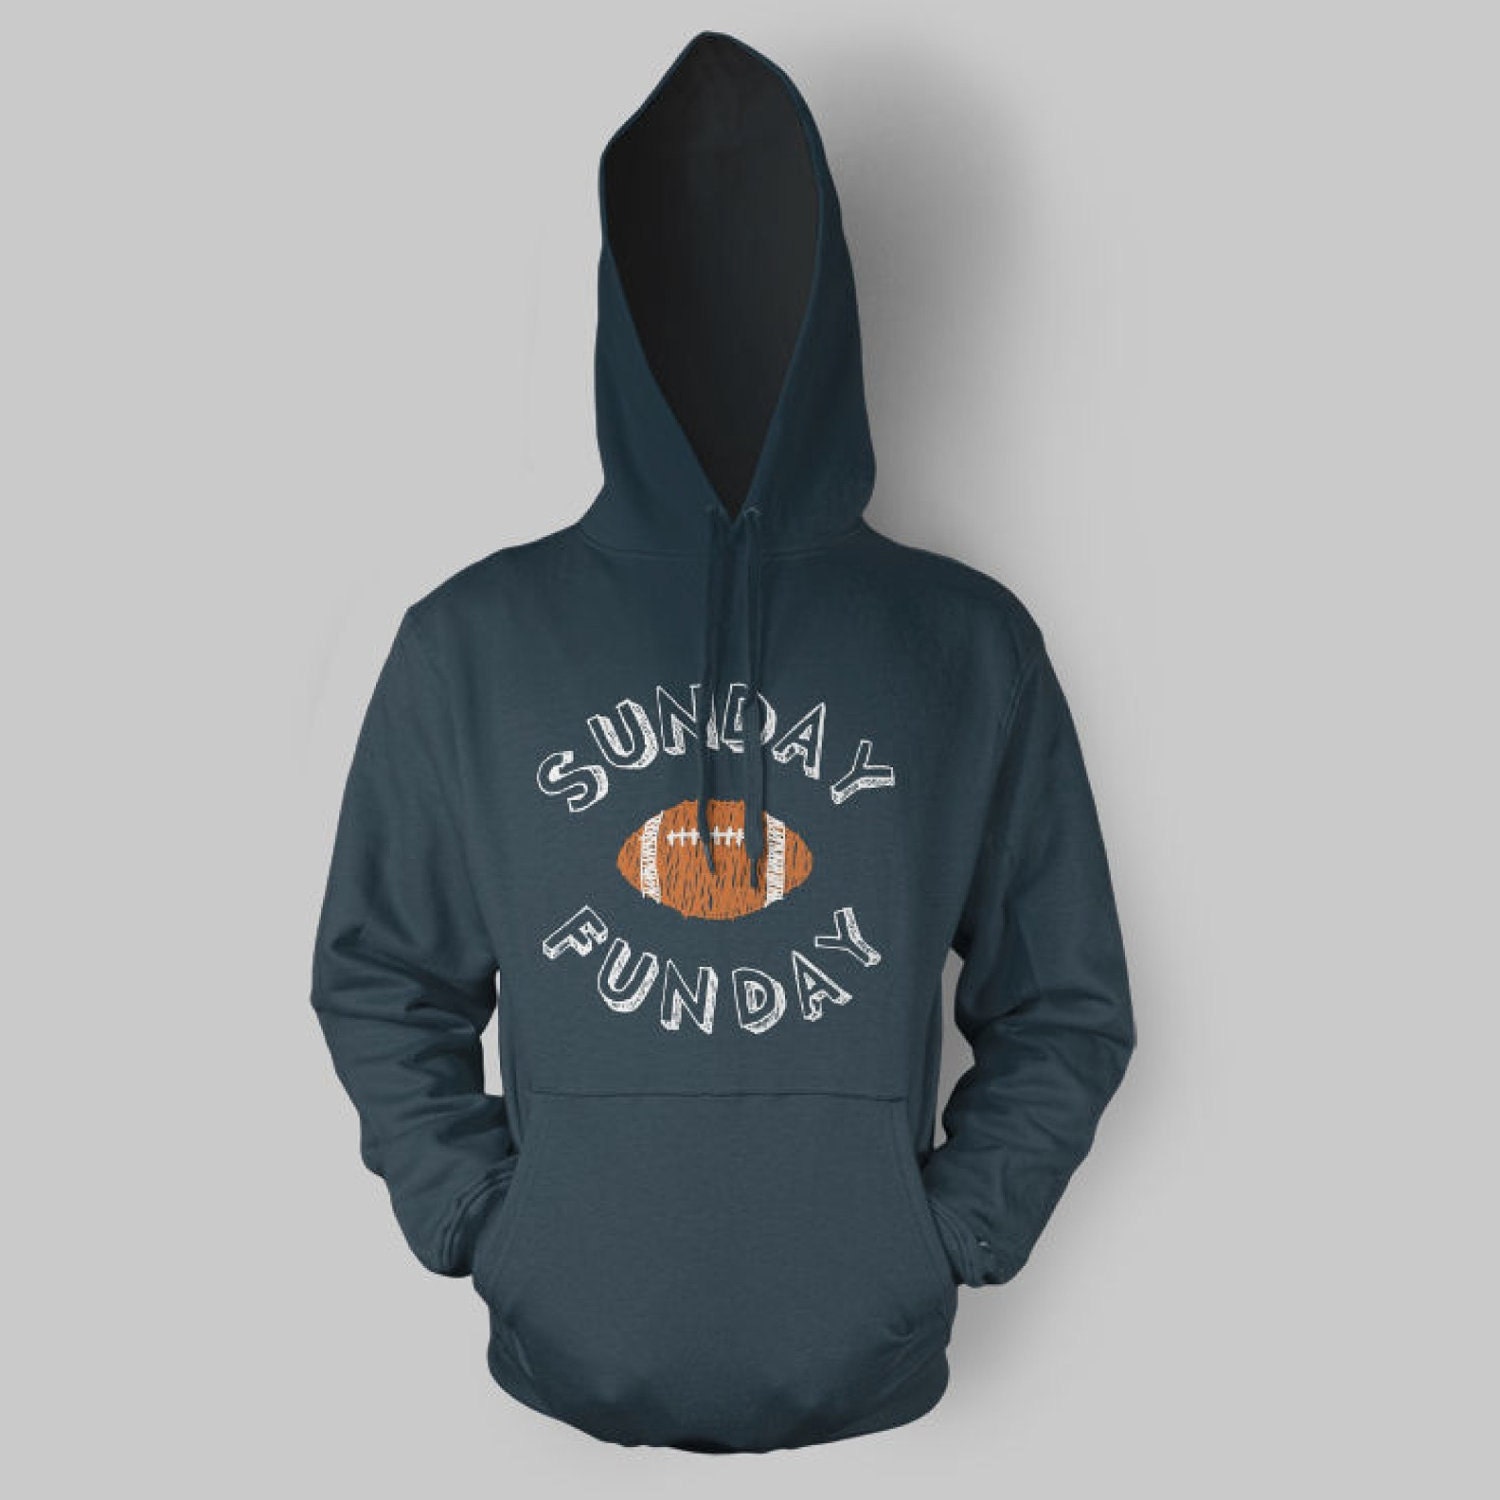 Sunday Funday Hoodie By Chitownclothing On Etsy